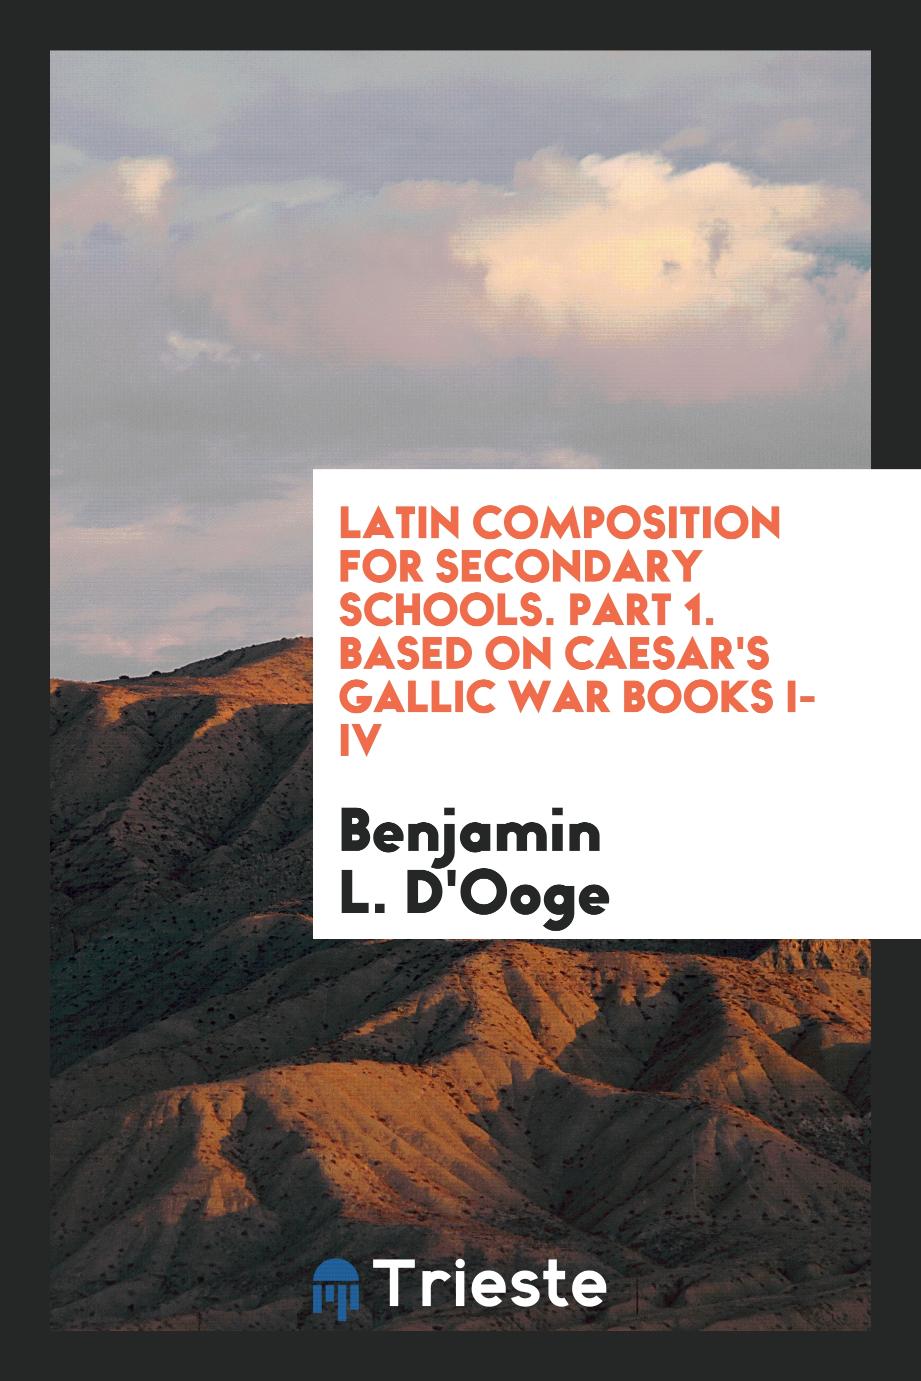 Latin Composition for Secondary Schools. Part 1. Based on Caesar's Gallic War Books I-IV